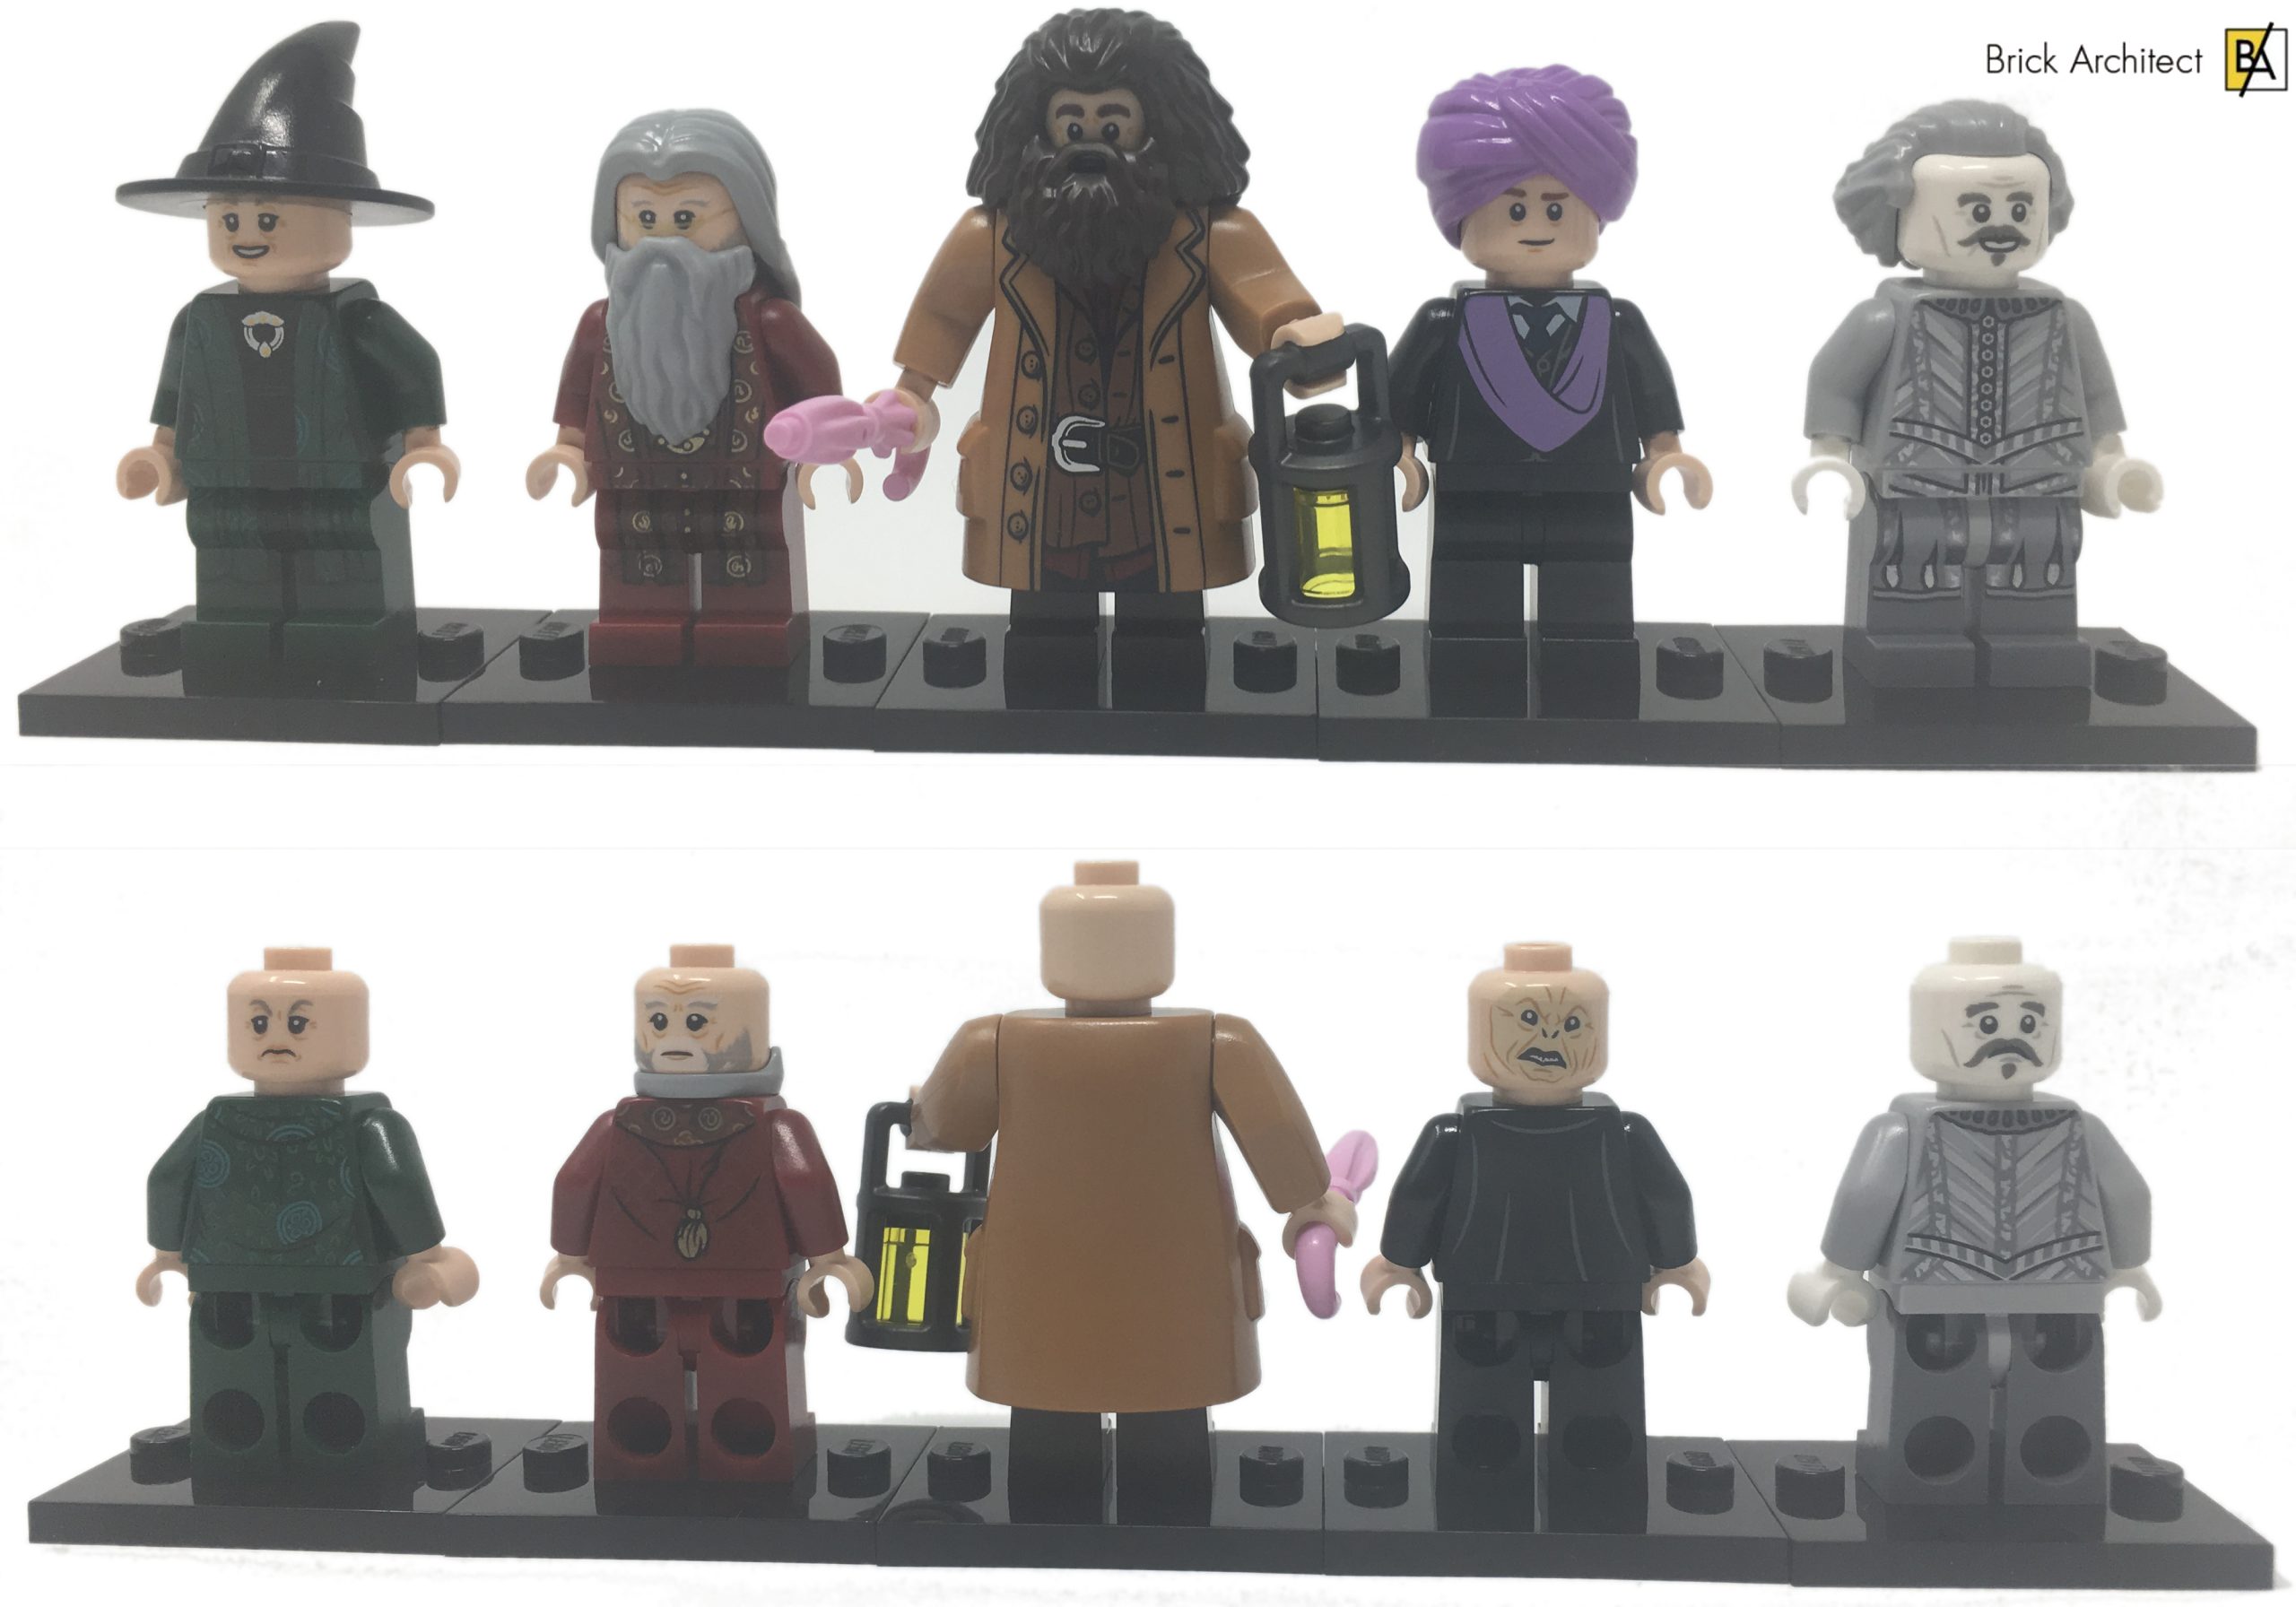 harry potter lego great hall best price